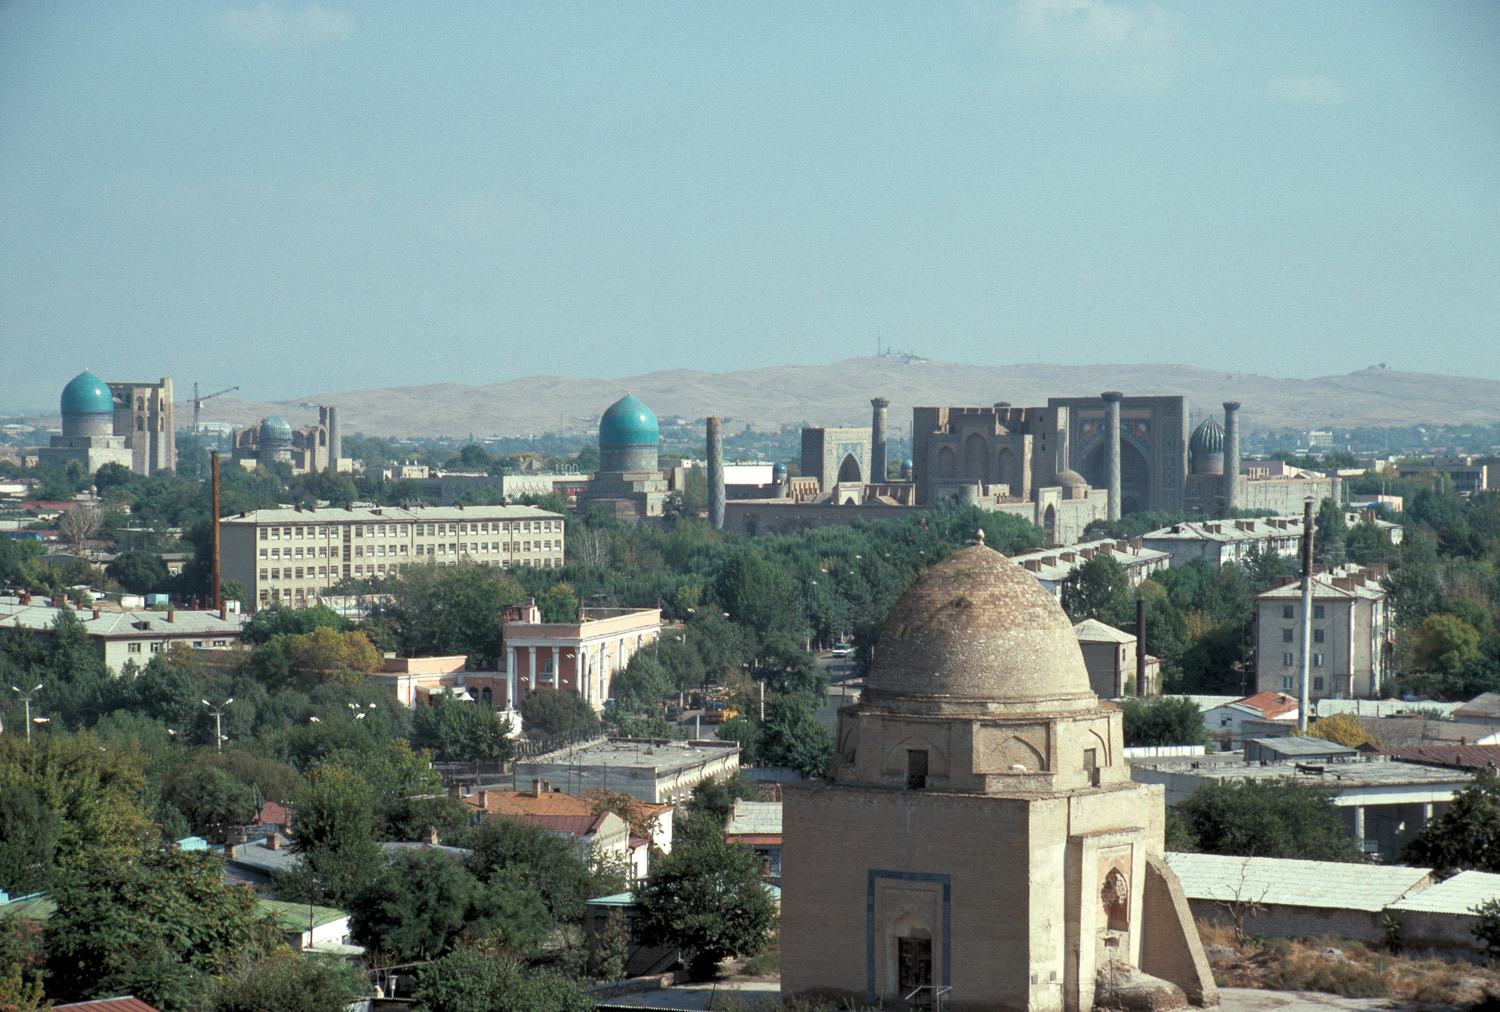 Exterior panoramic view of city with Mausoleum of Ruhabad in forefront